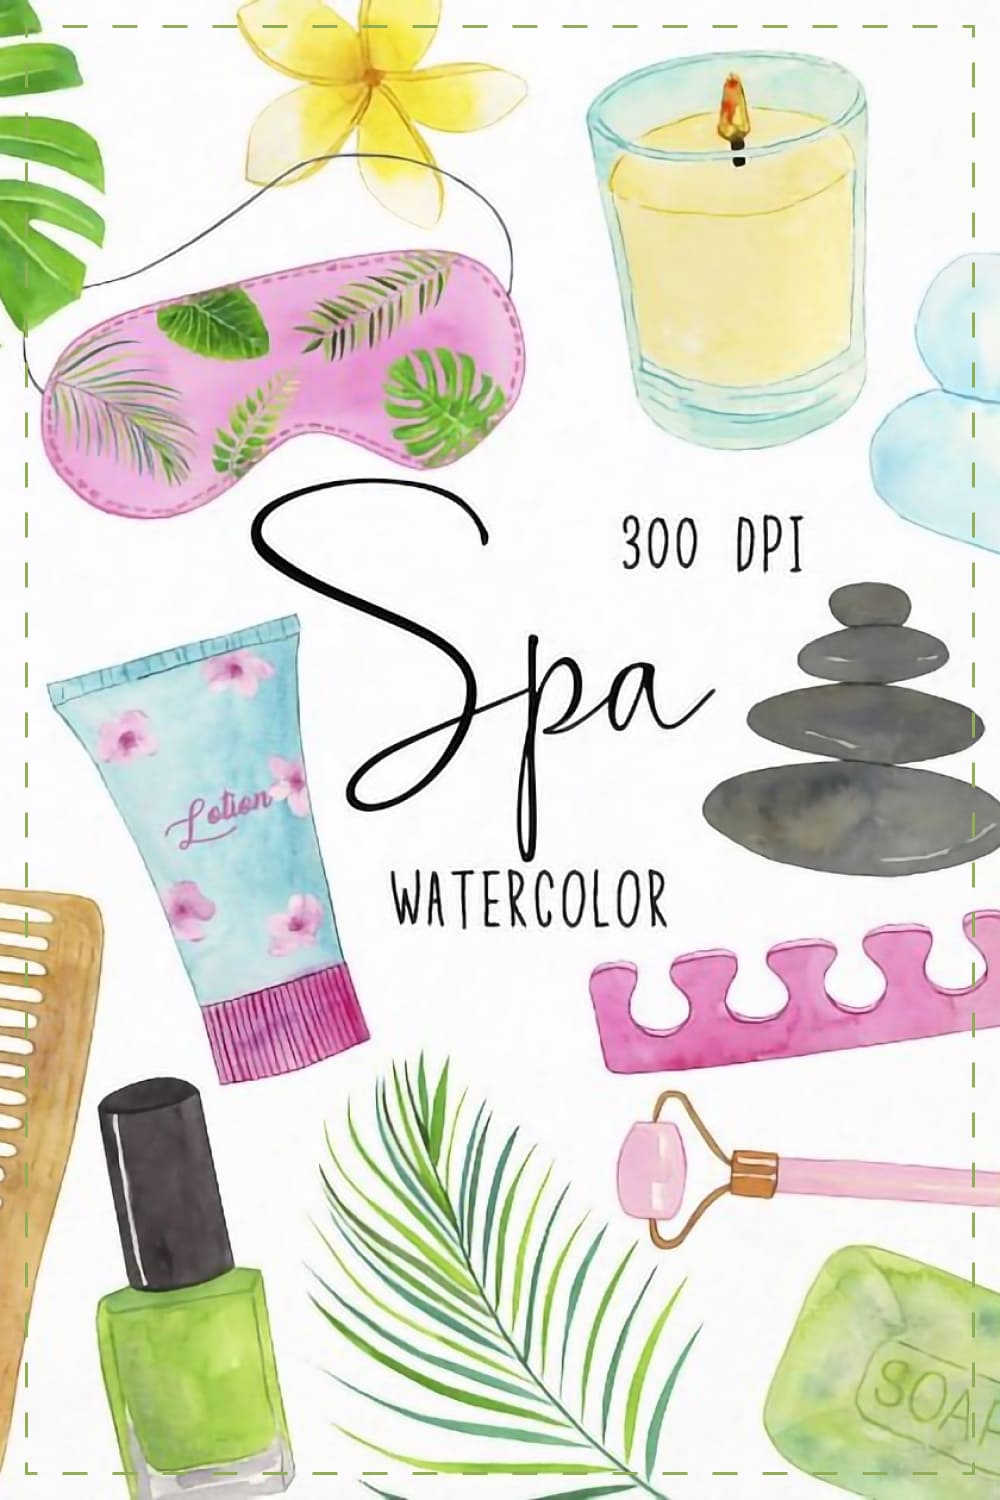 Watercolor spa clipart - pinterest image preview.